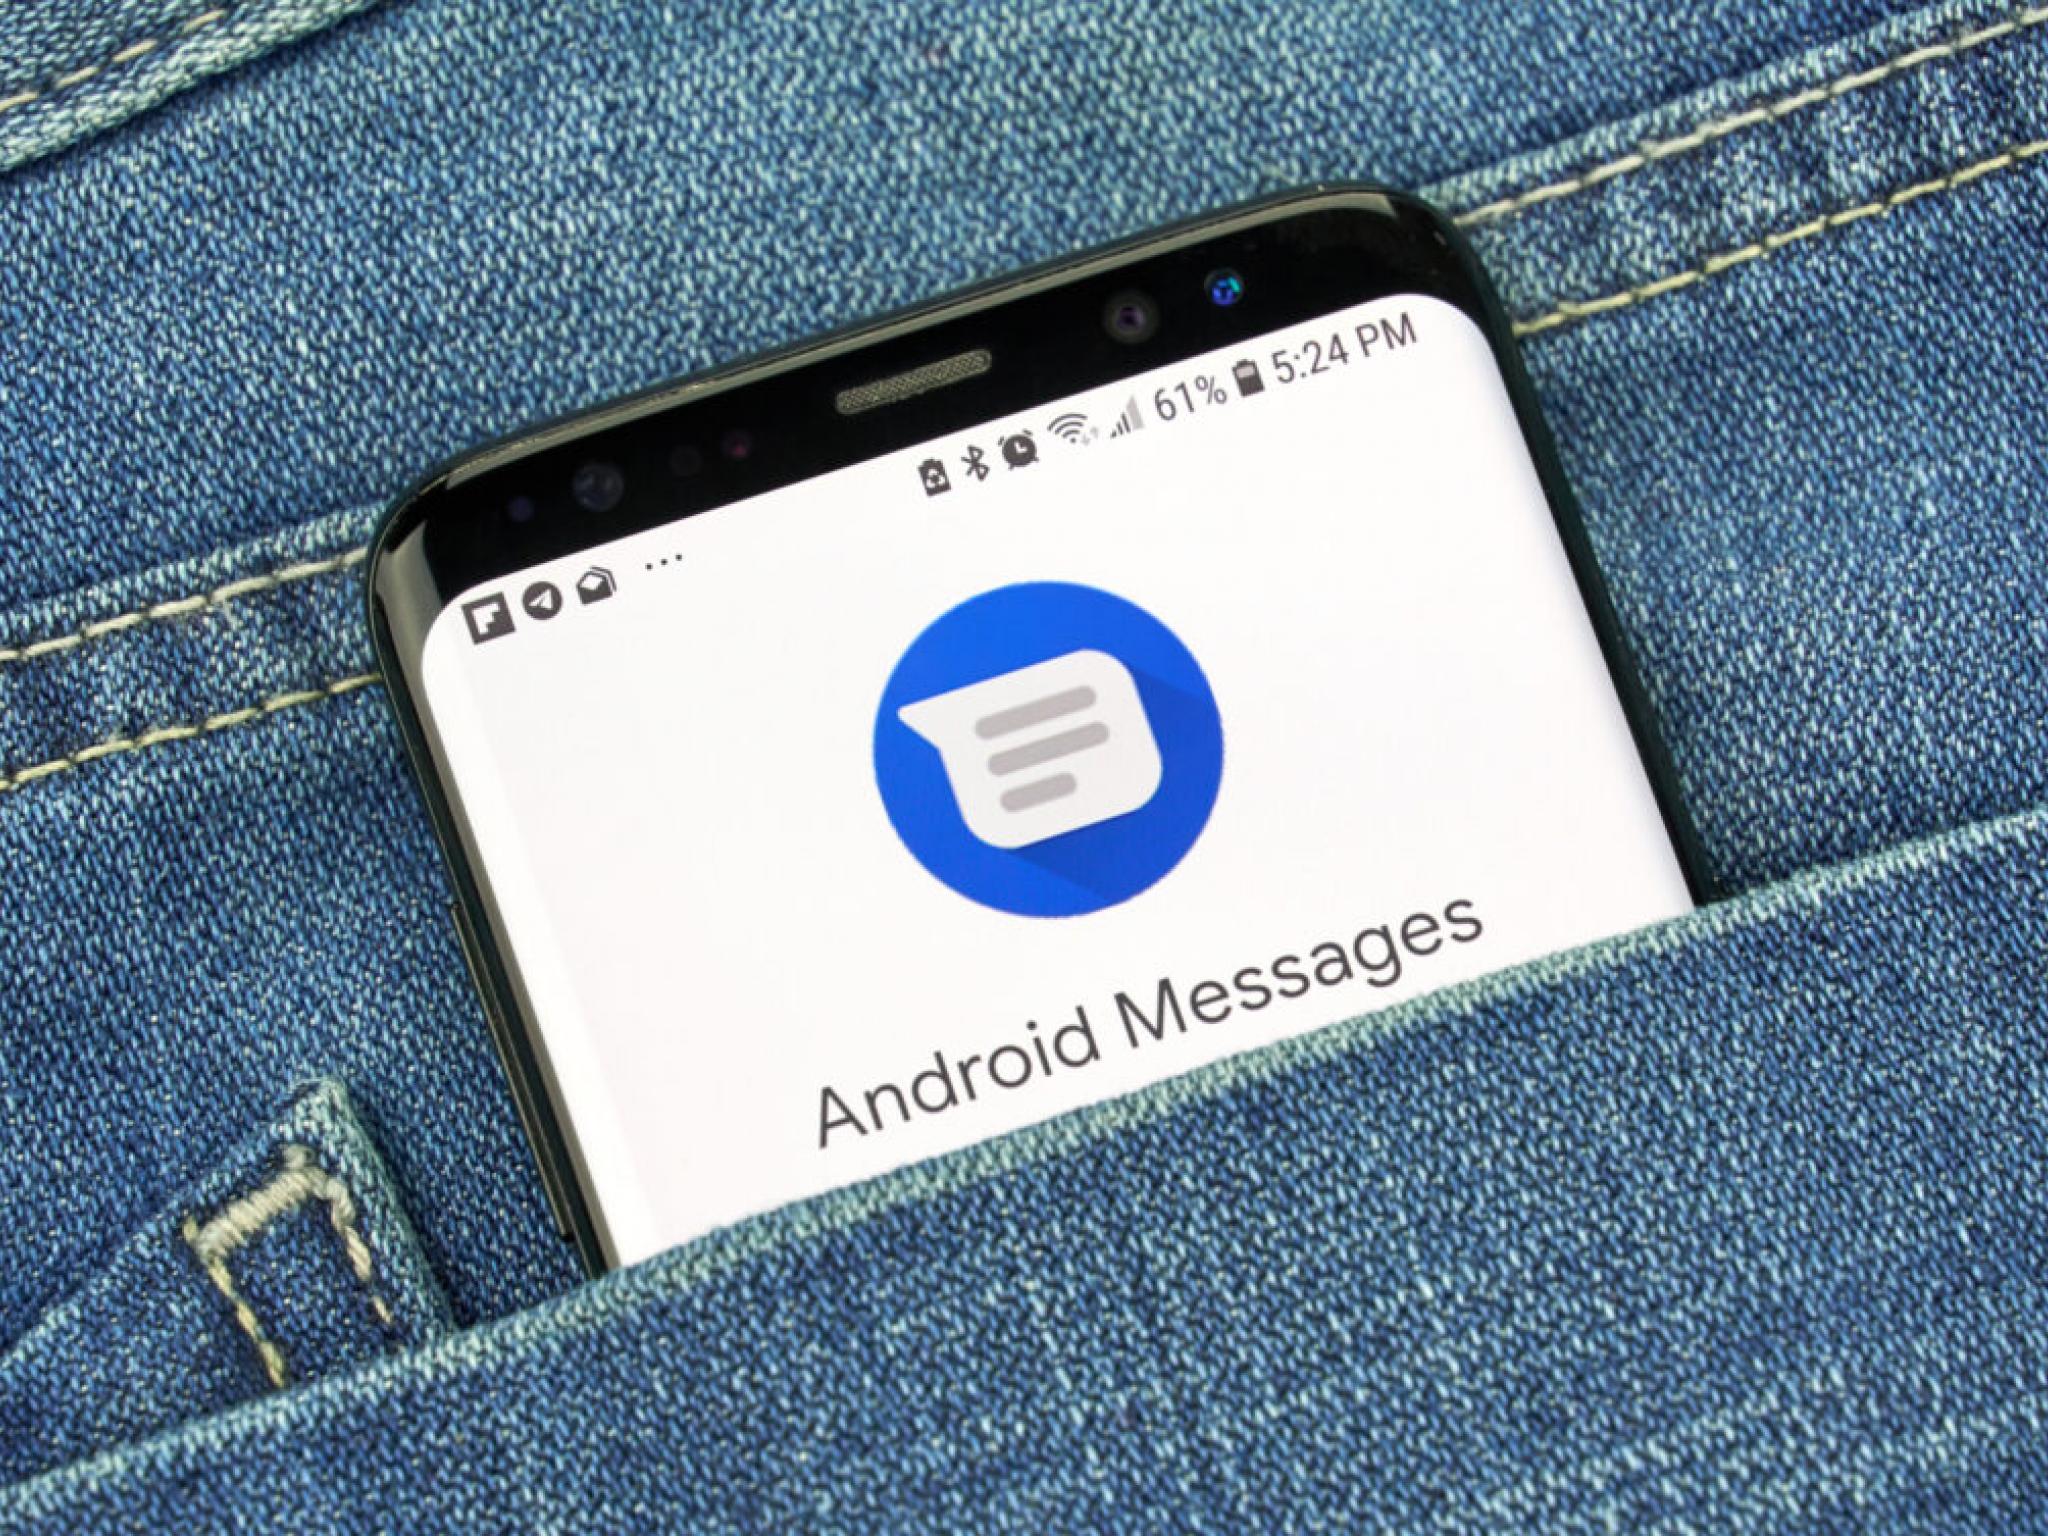  google-messages-suddenly-removes-no-encryption-icon-from-iphone-rcs-chats 